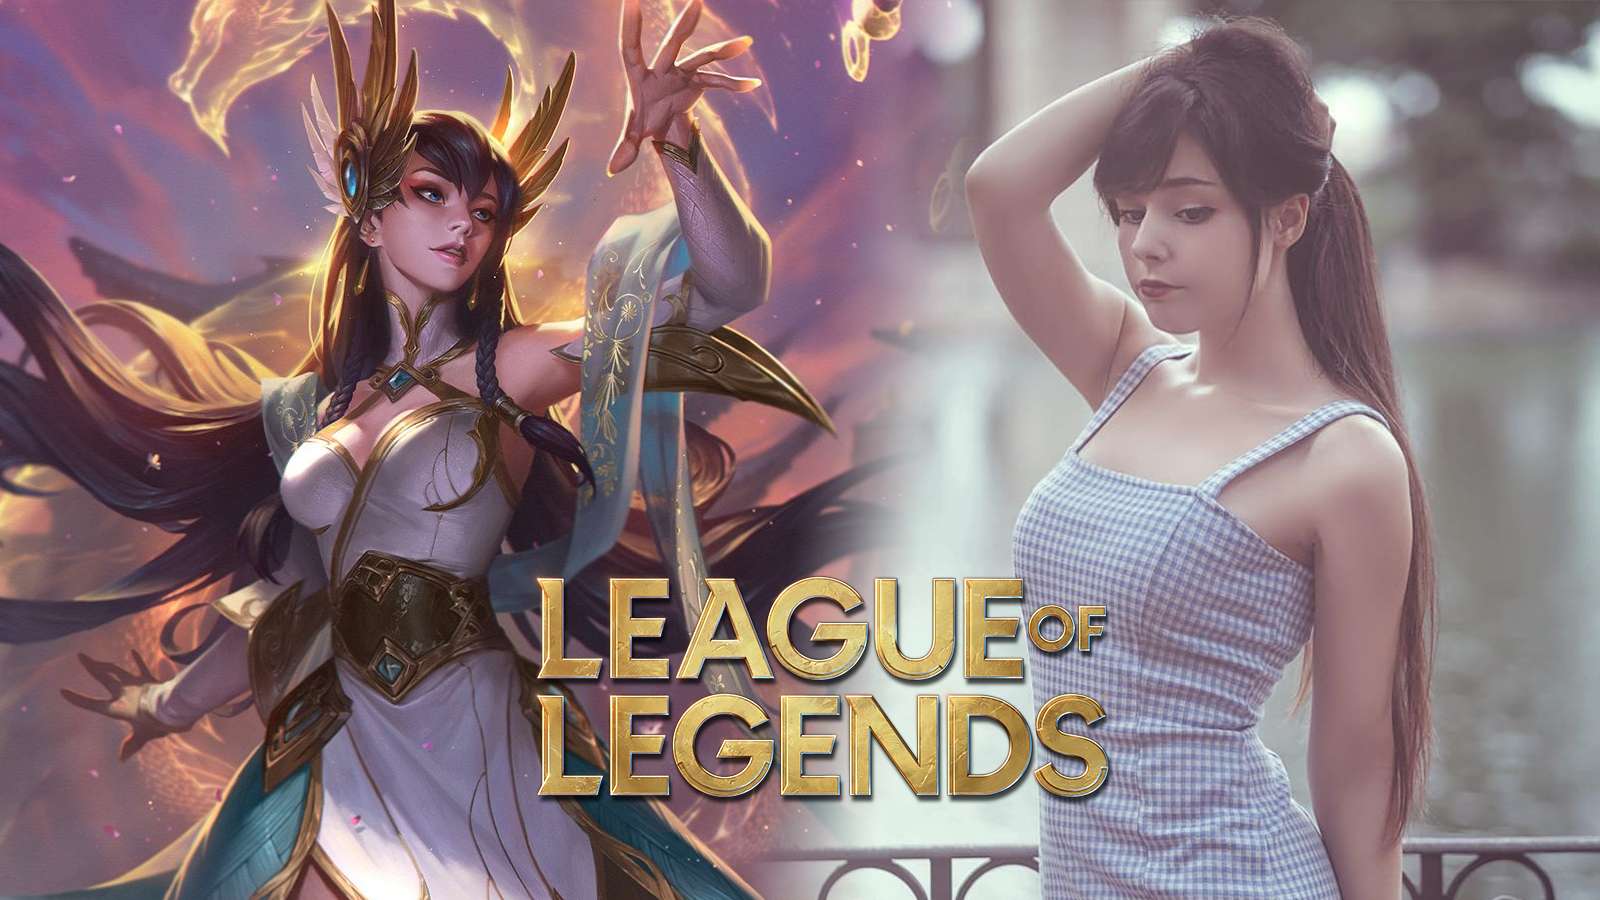 Divine Sword Irelia in League of Legends and cosplayer nymphahri